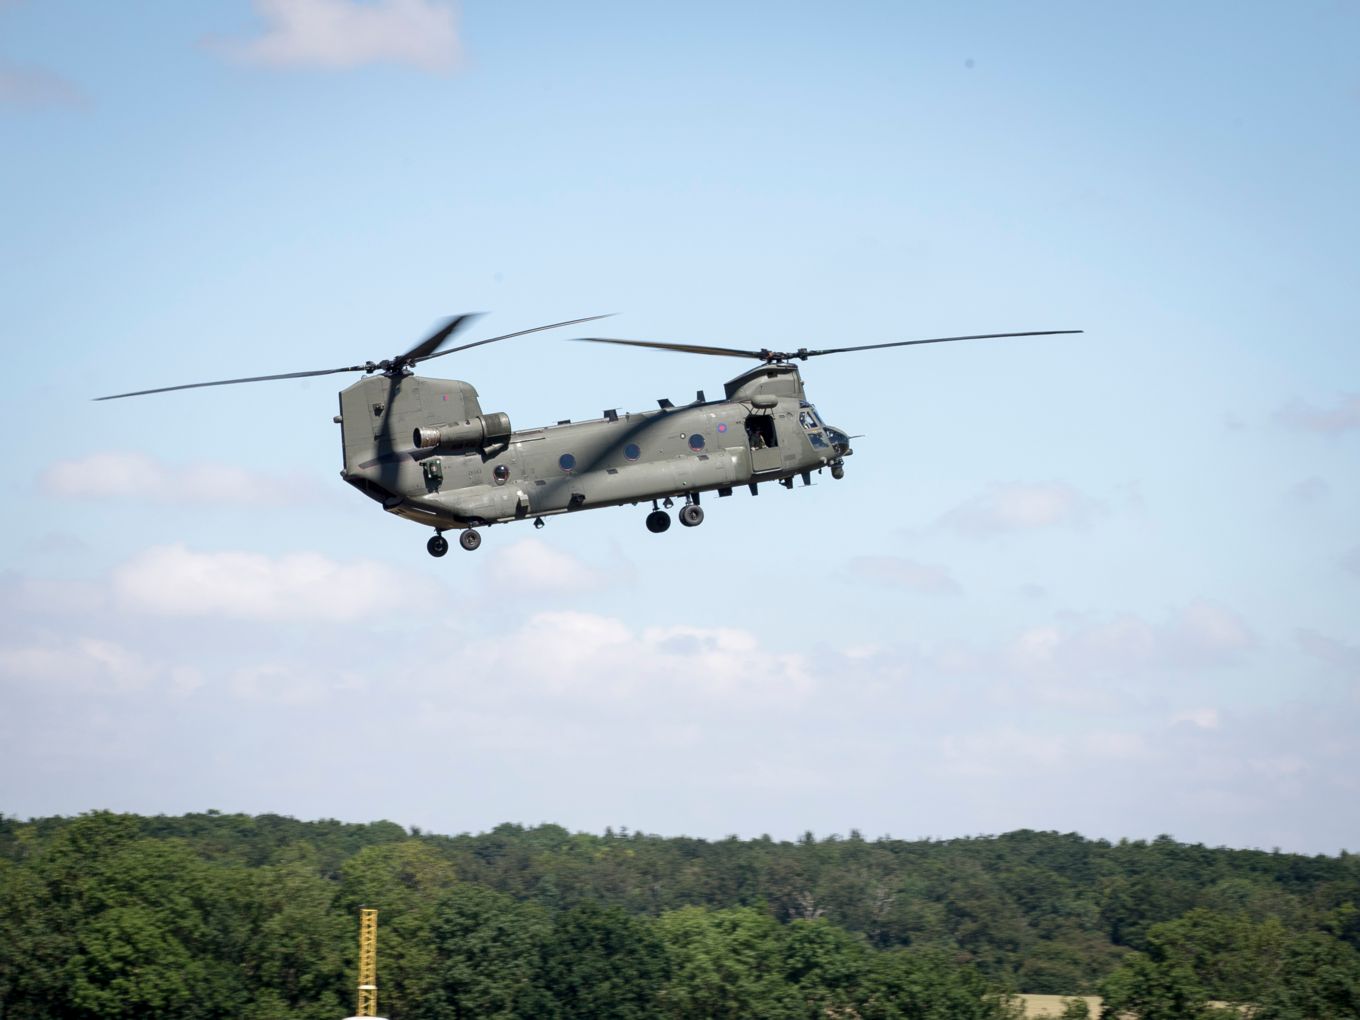 A Chinook helicopter at RAF Wittering in 2018.